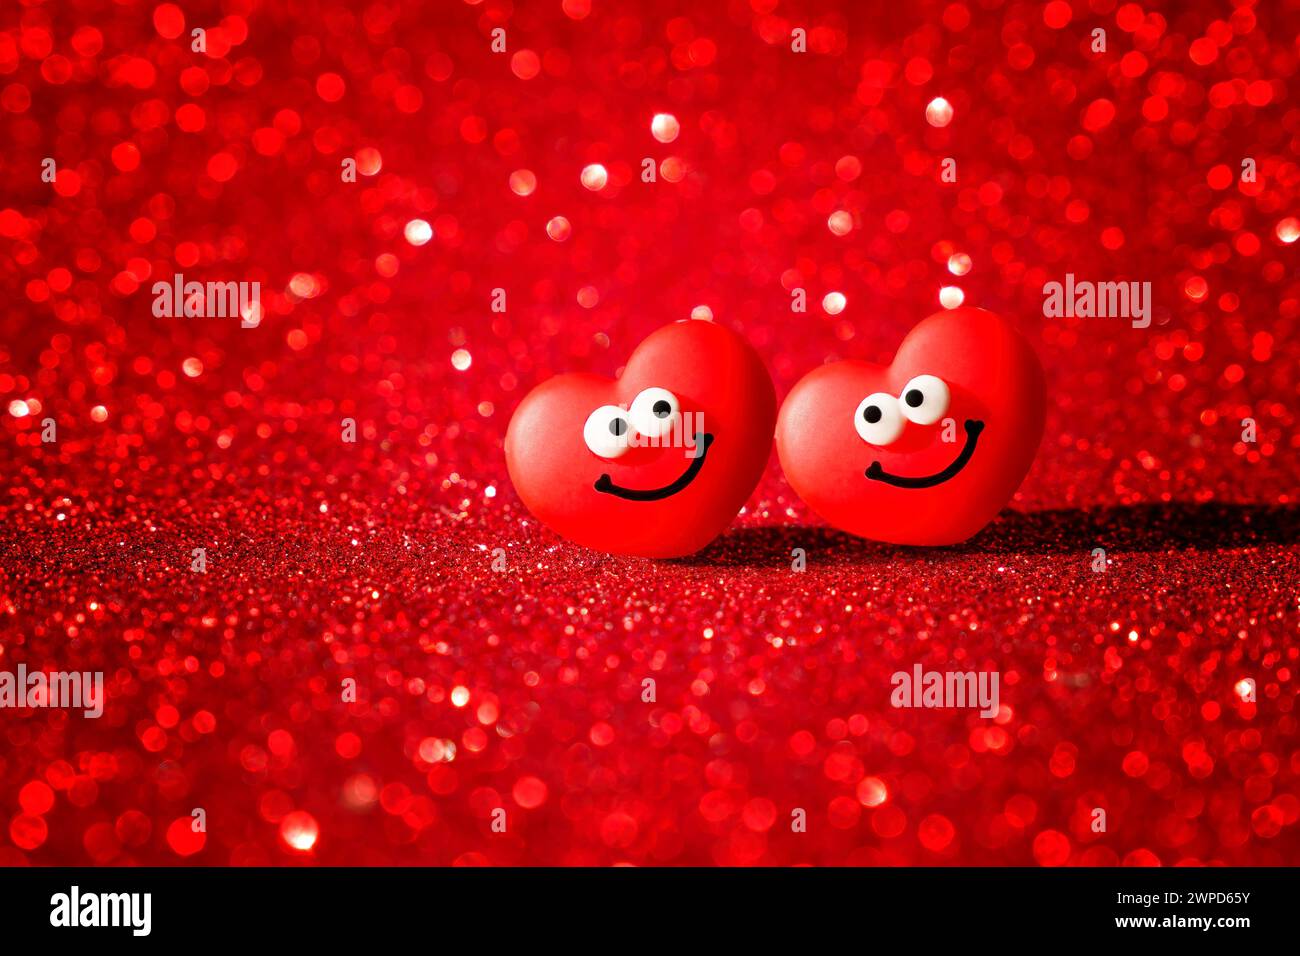 Two joyous heart characters adorned with smiles set against a backdrop of sparkling red. Valentine's Day card full of romance and bliss. Stock Photo